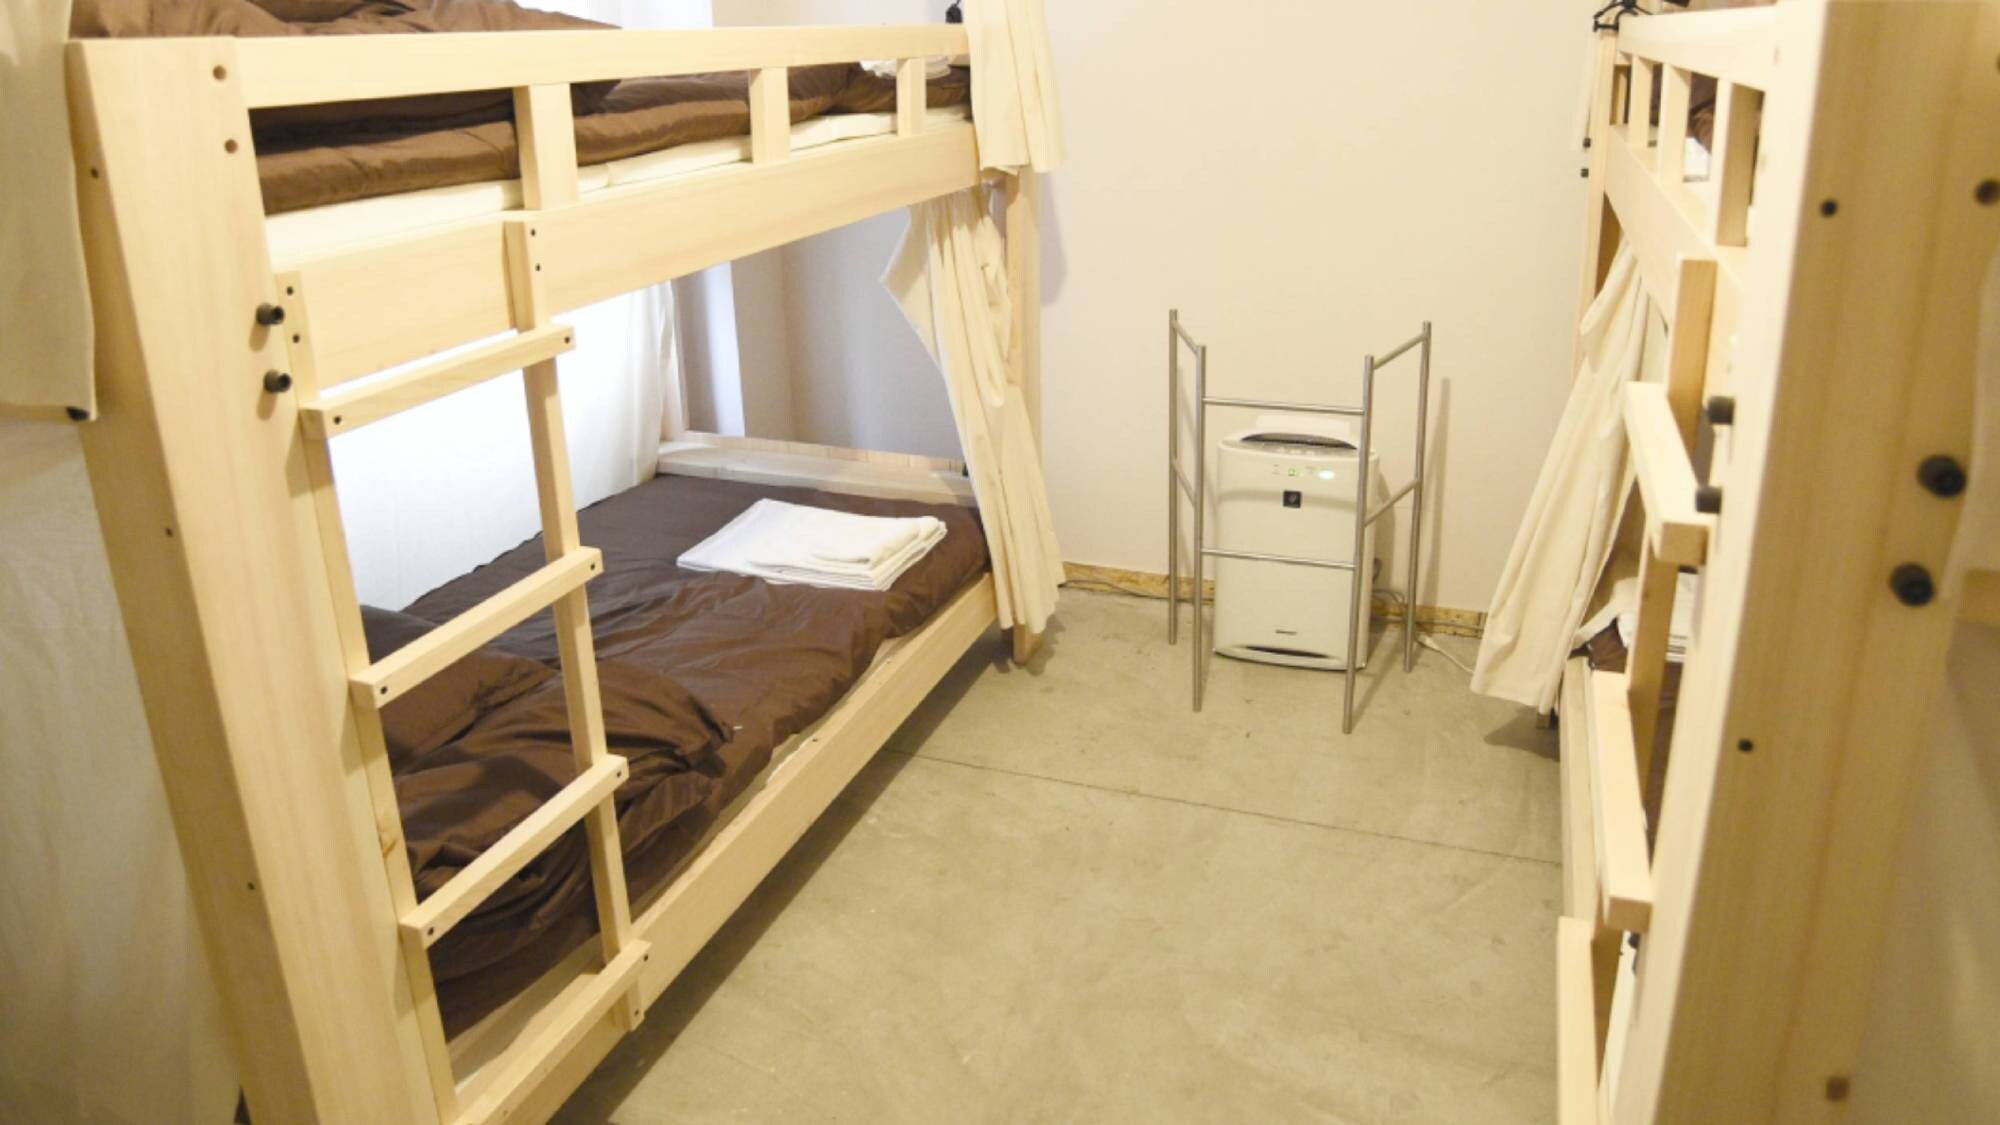 ・ [Example of mixed dormitory for men and women] Up to 4 people can stay in one room with 2 bunk beds.